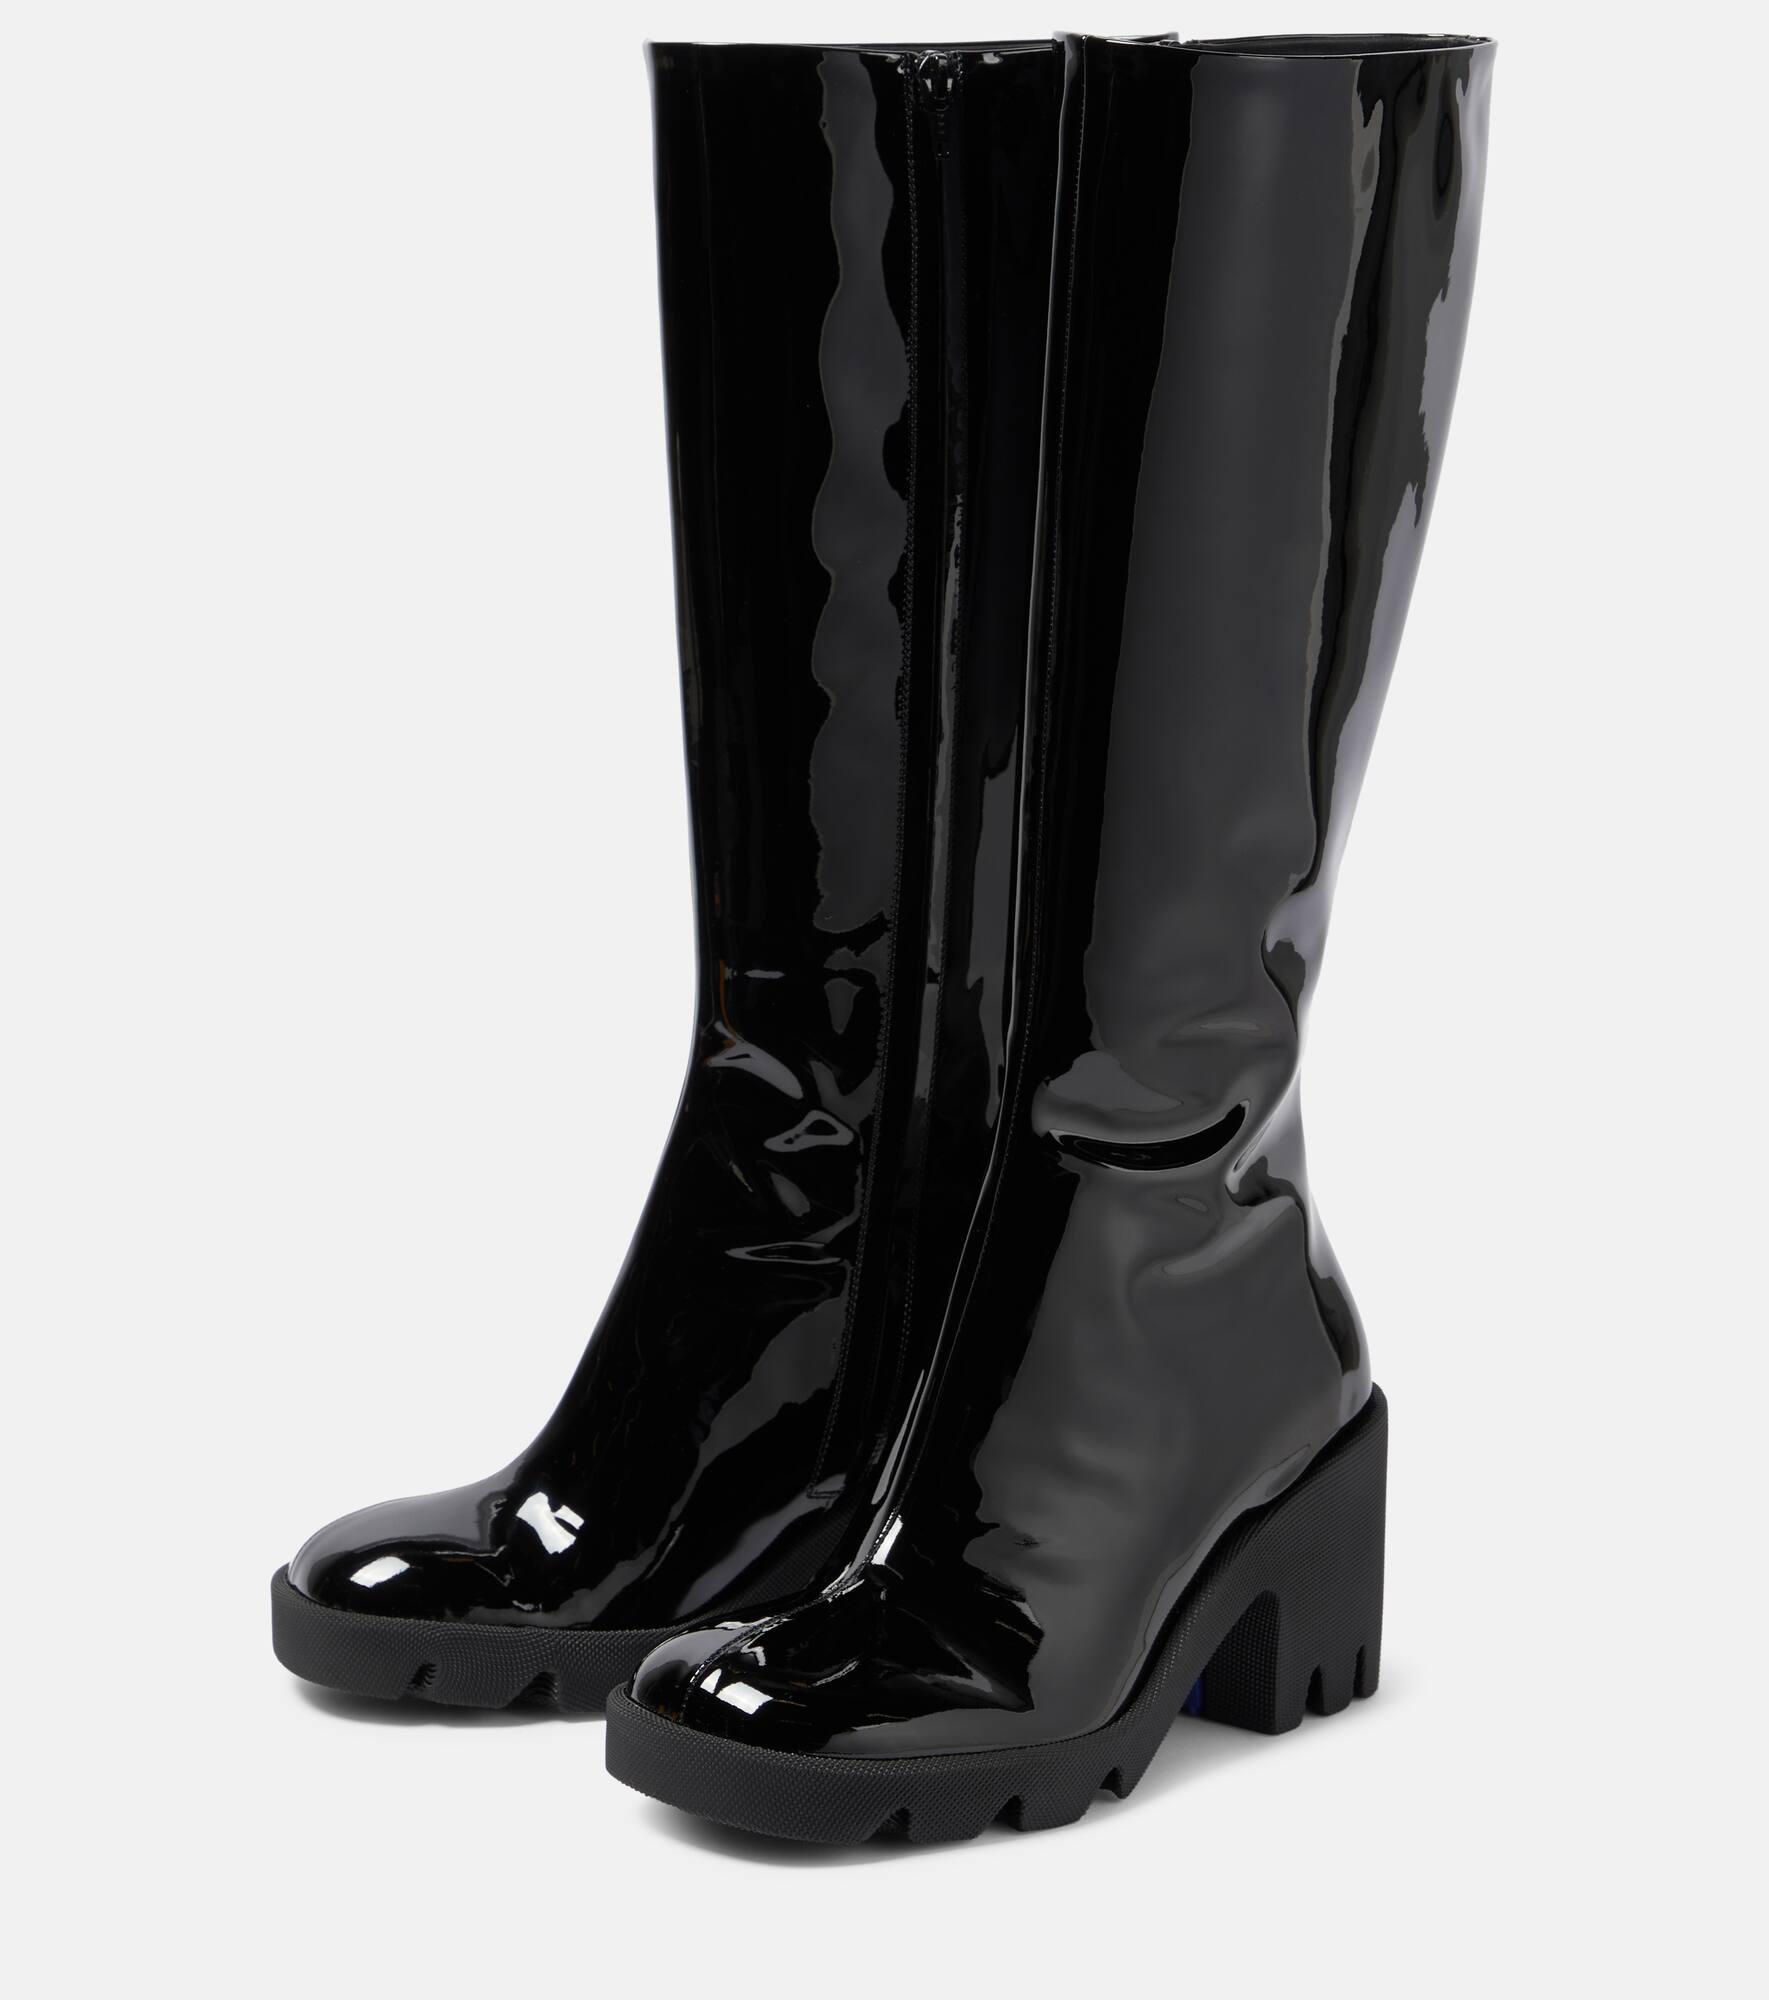 Stride patent leather knee-high boots - 5